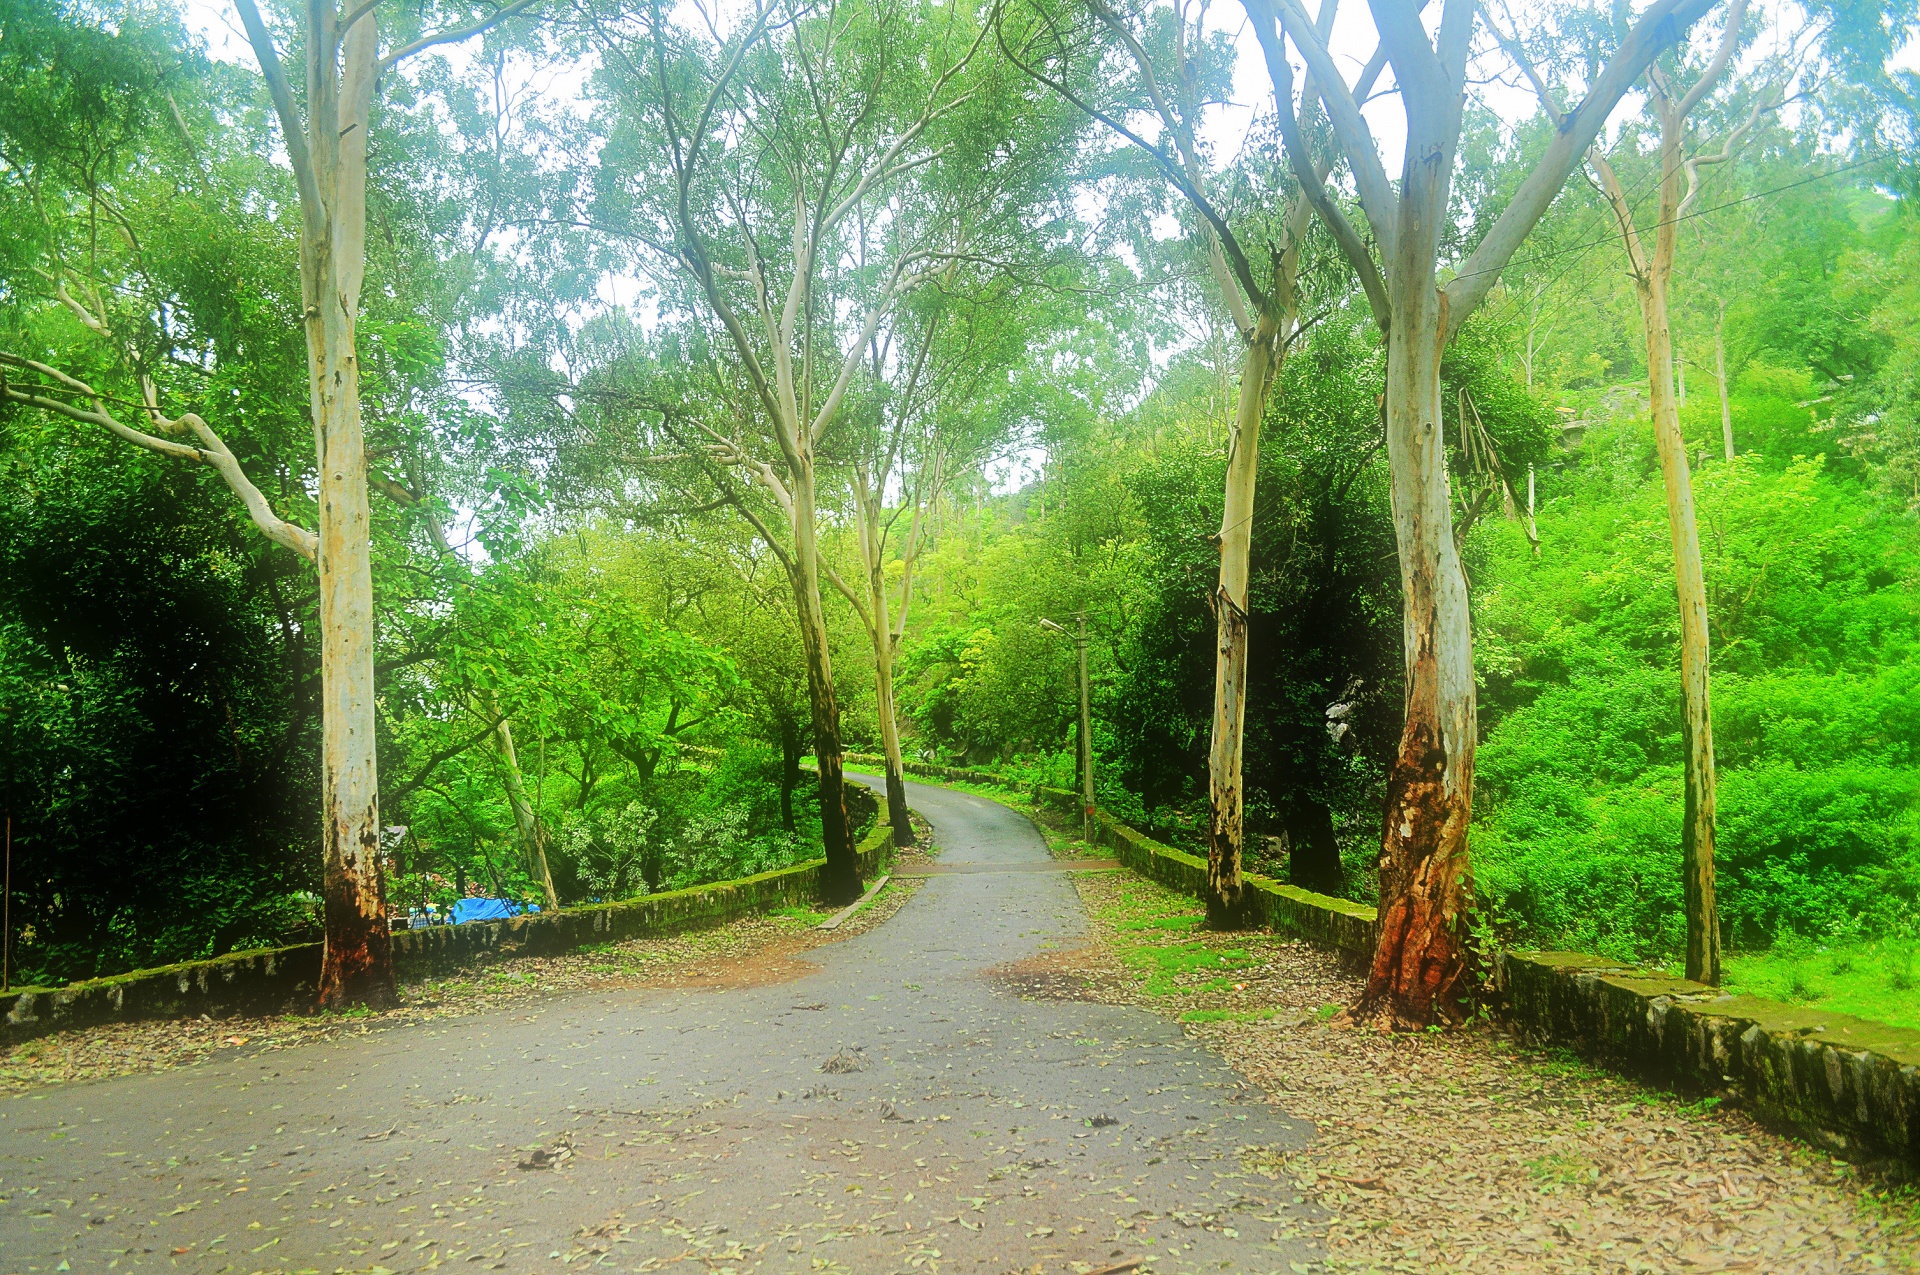 Road disappearing into lush green forest in monsoon season